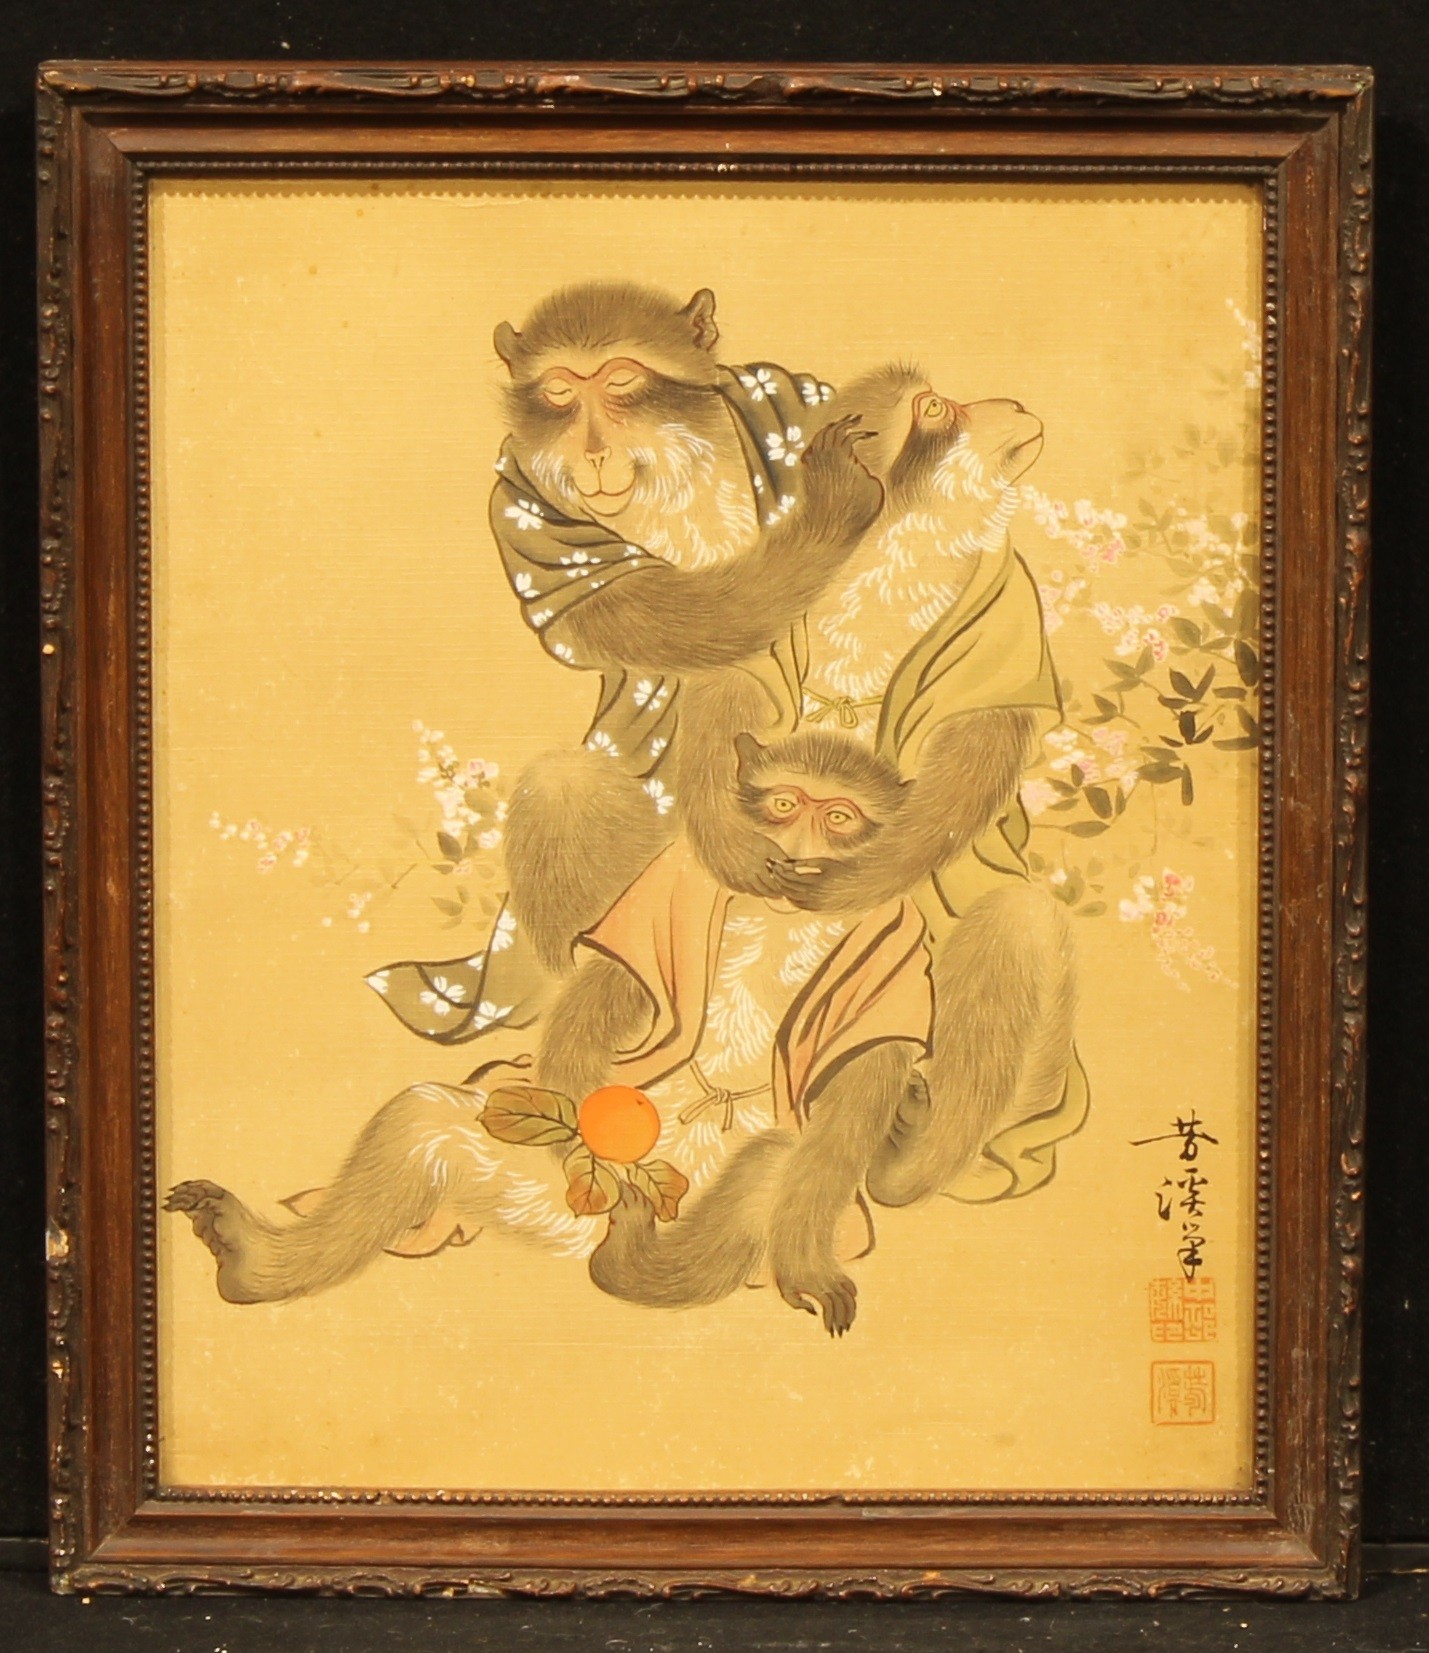 Horyu (Japanese, Meiji Period) Monkeys signed, red seals, watercolour, 37.5cm x 30.5cm - Image 2 of 4